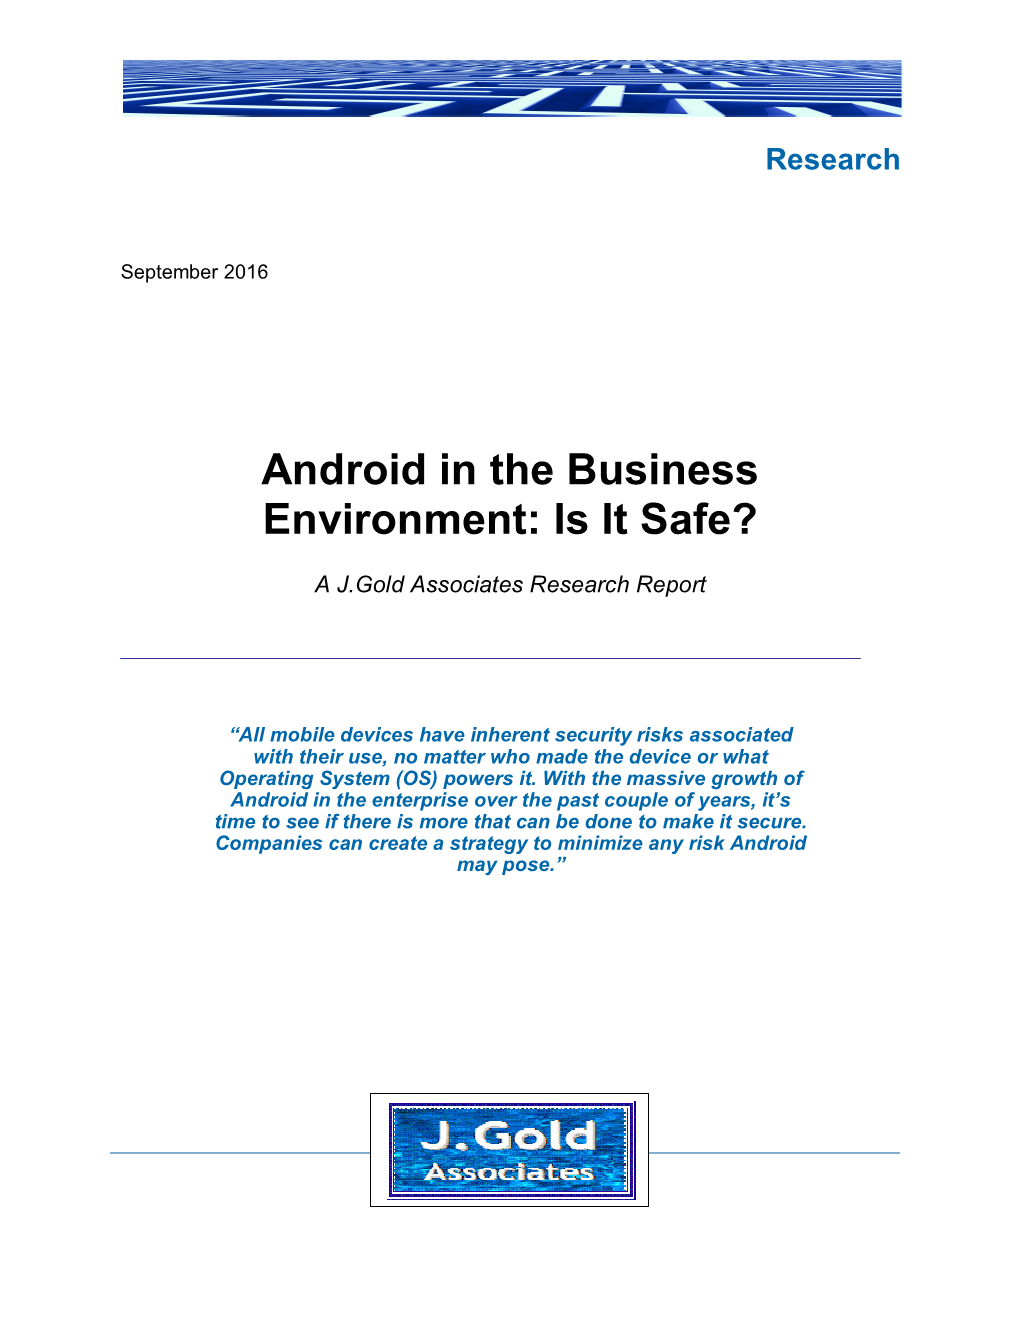 Android in the Business Environment: Is It Safe?